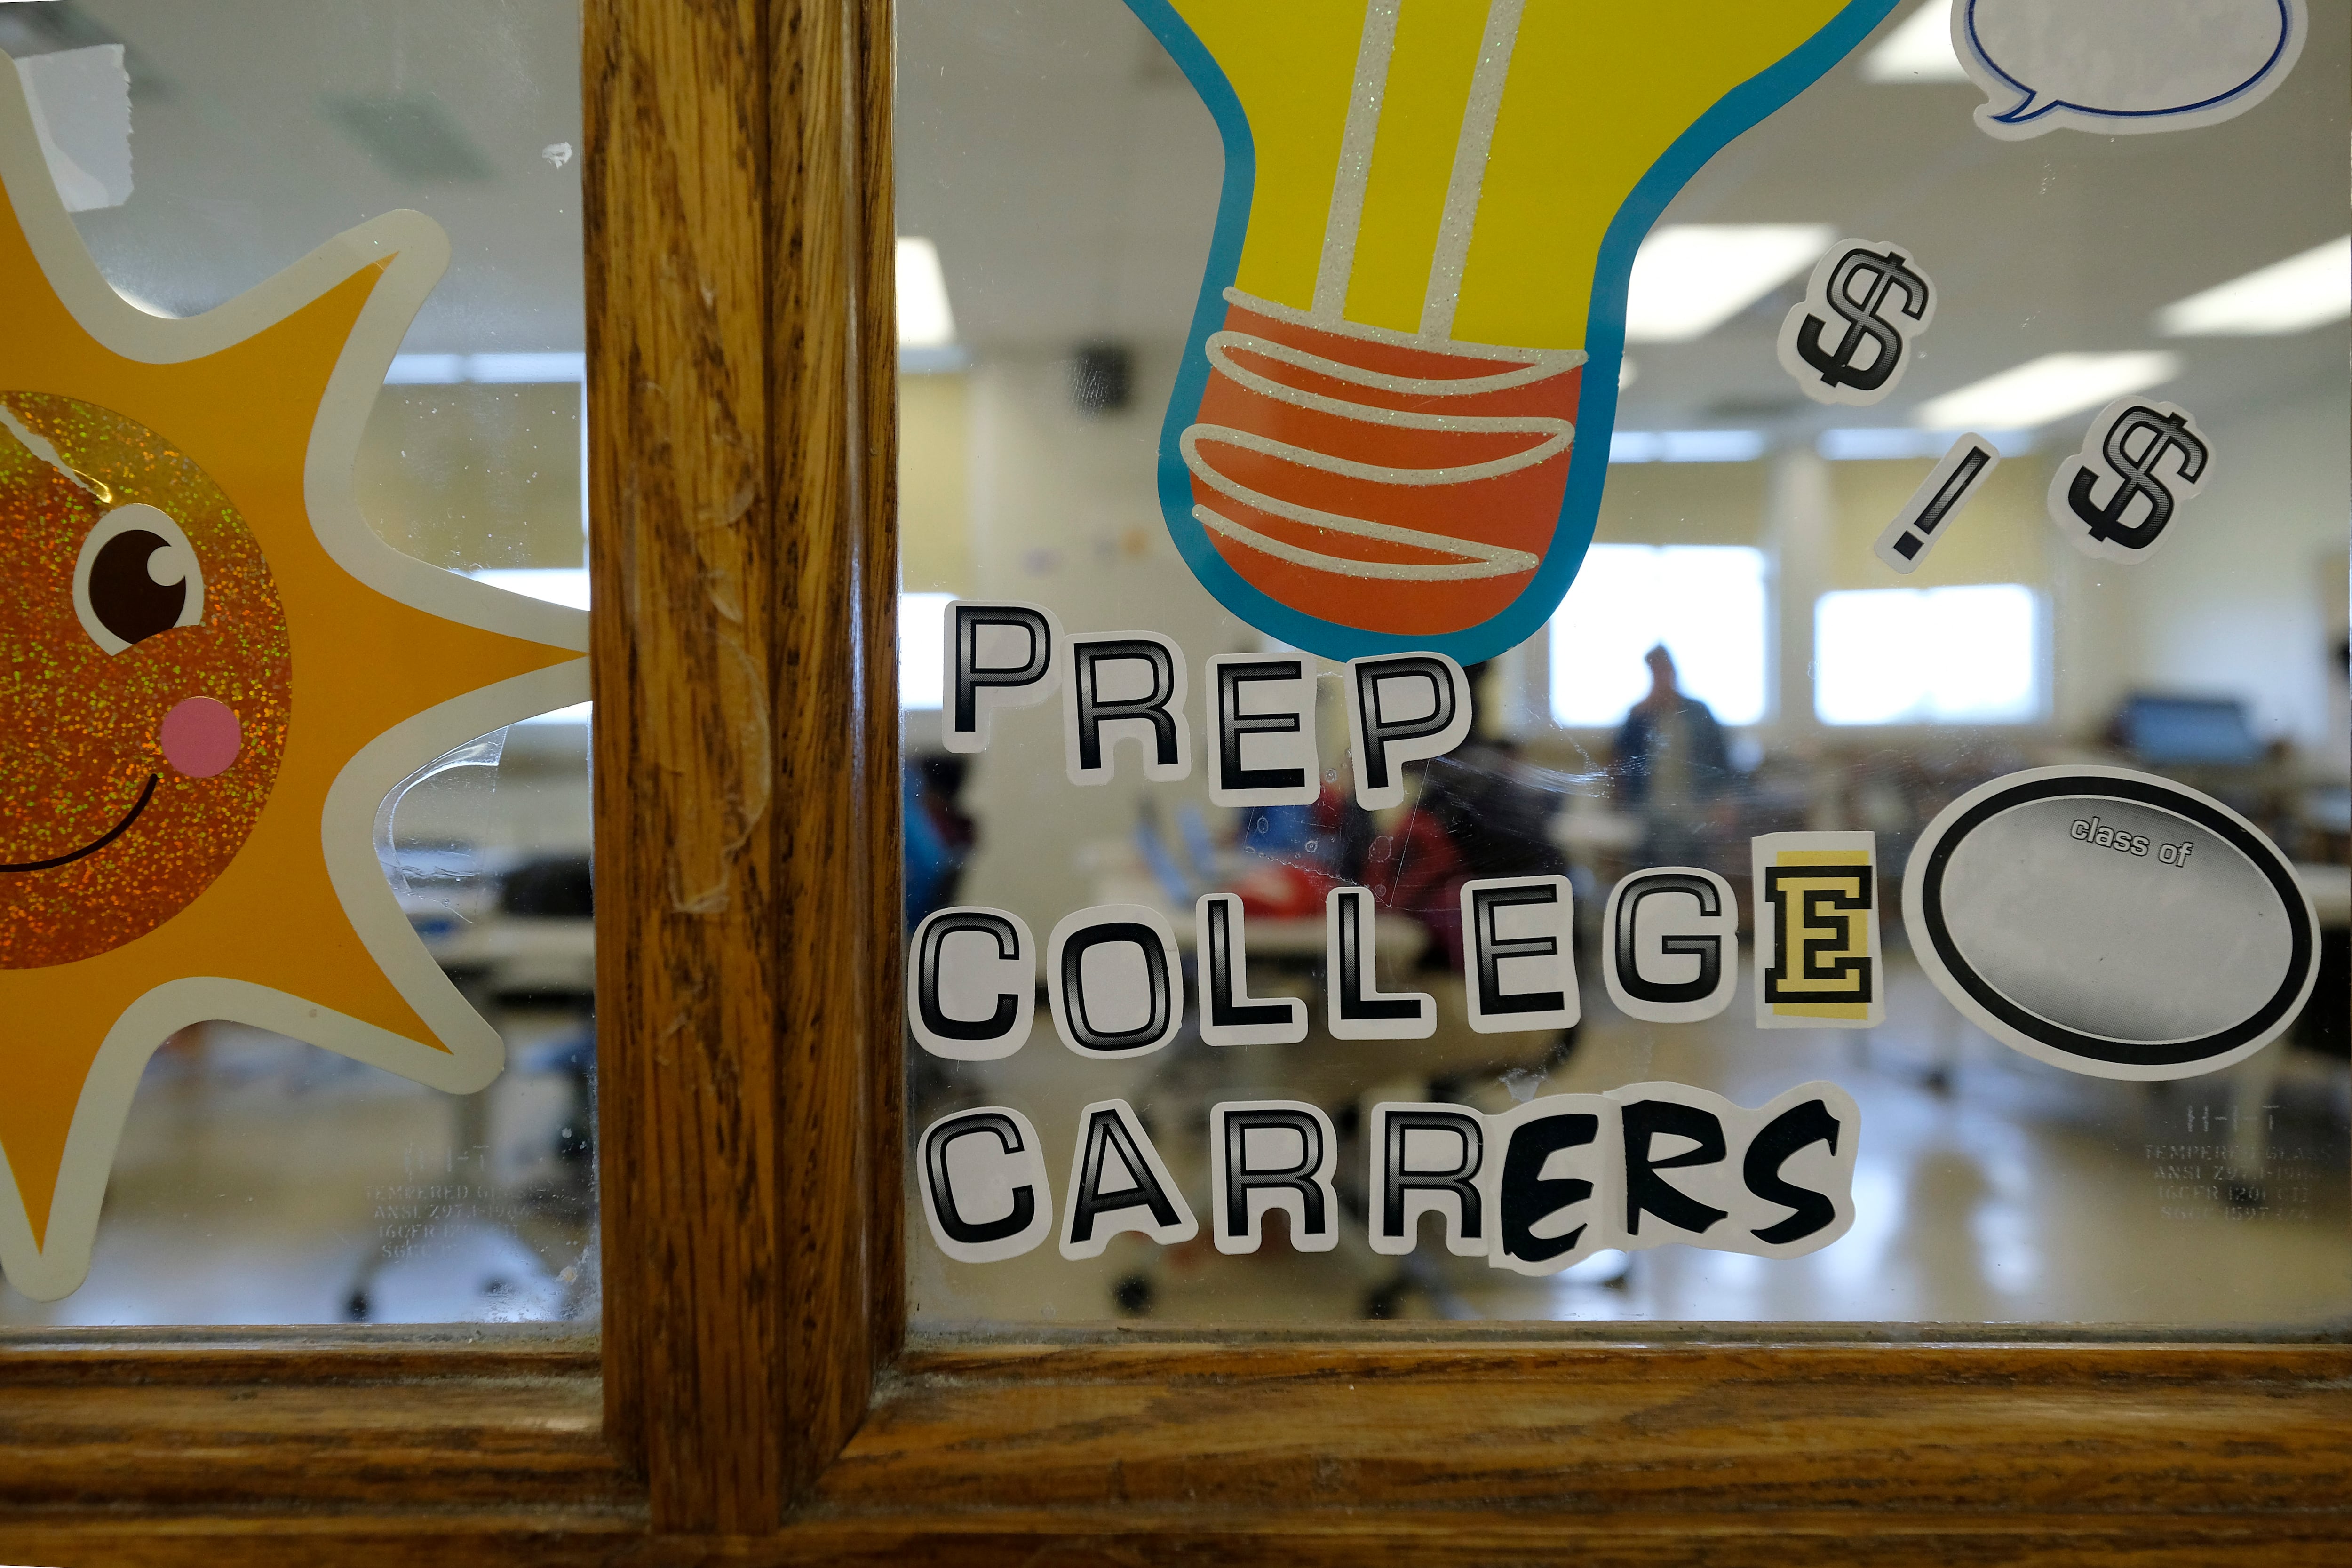 Bright letters on a window inside of a school spell "Prep College Careers" along with a drawing of a smiling sun and a lightbulb.